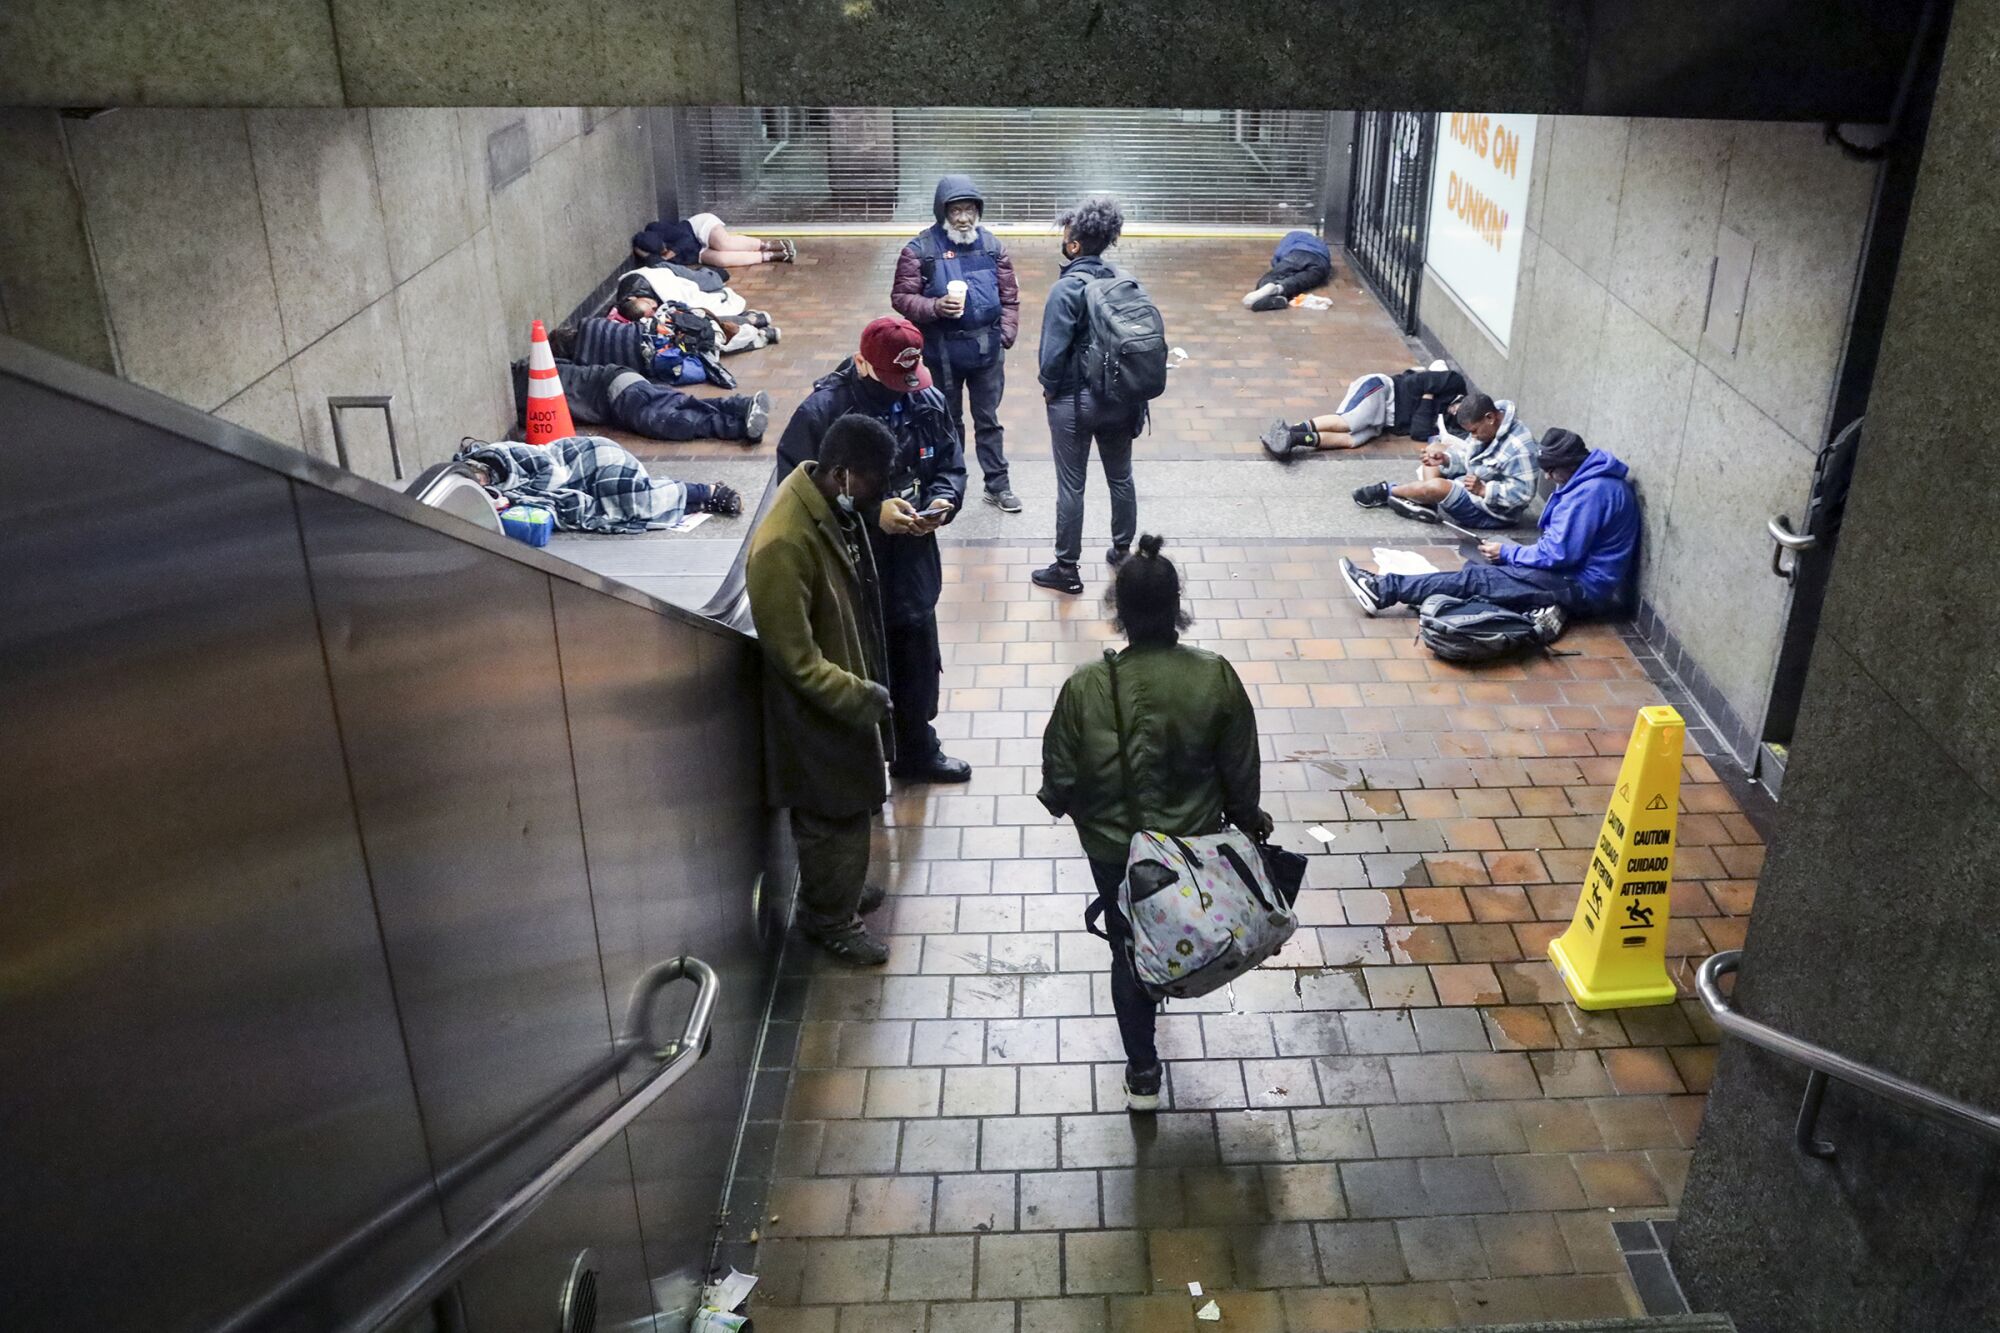 Workers check on the welfare of homeless people